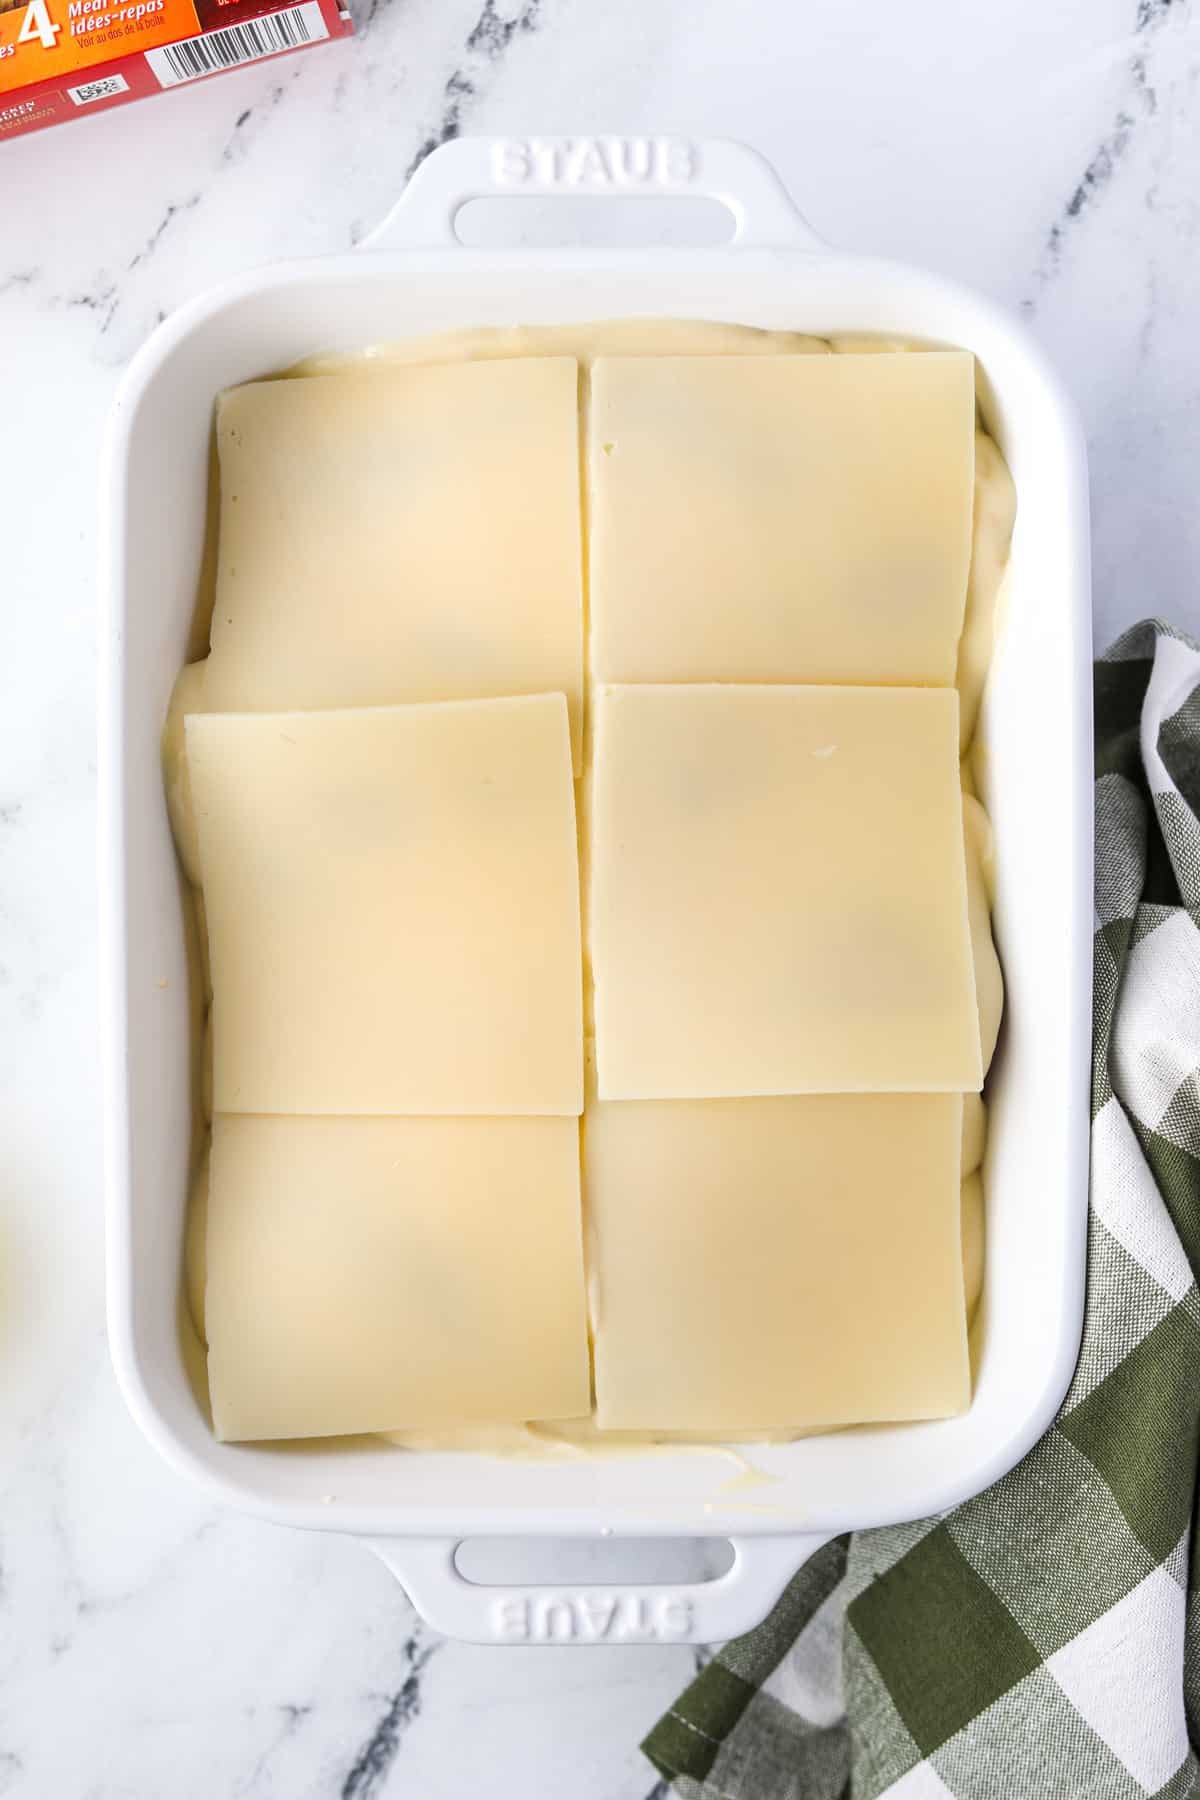 Topping a casserole with Swiss cheese slices.